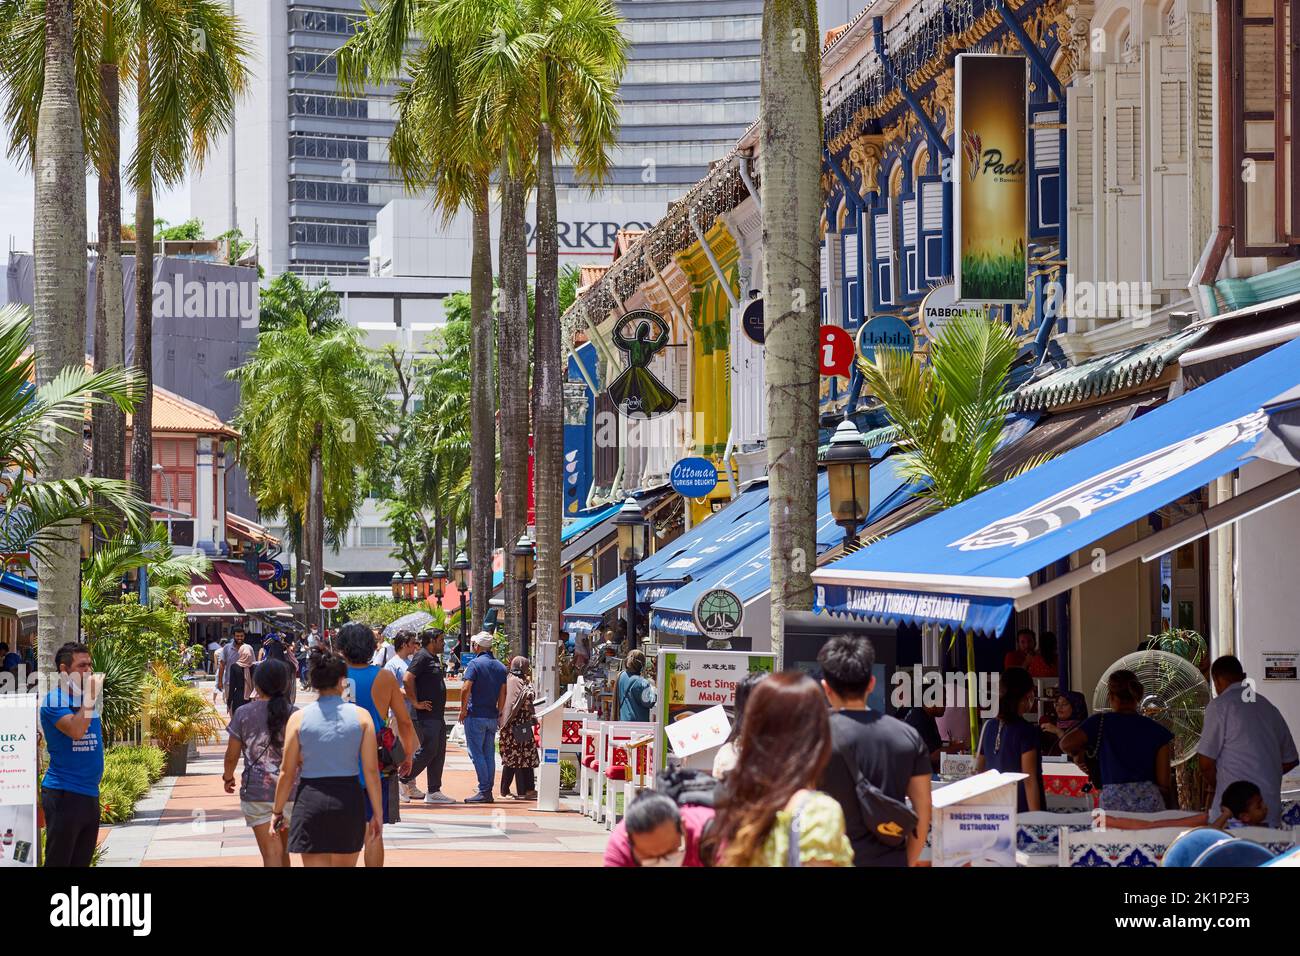 Bussorah Street with people in Kampong Glam village, Singapore Stock Photo